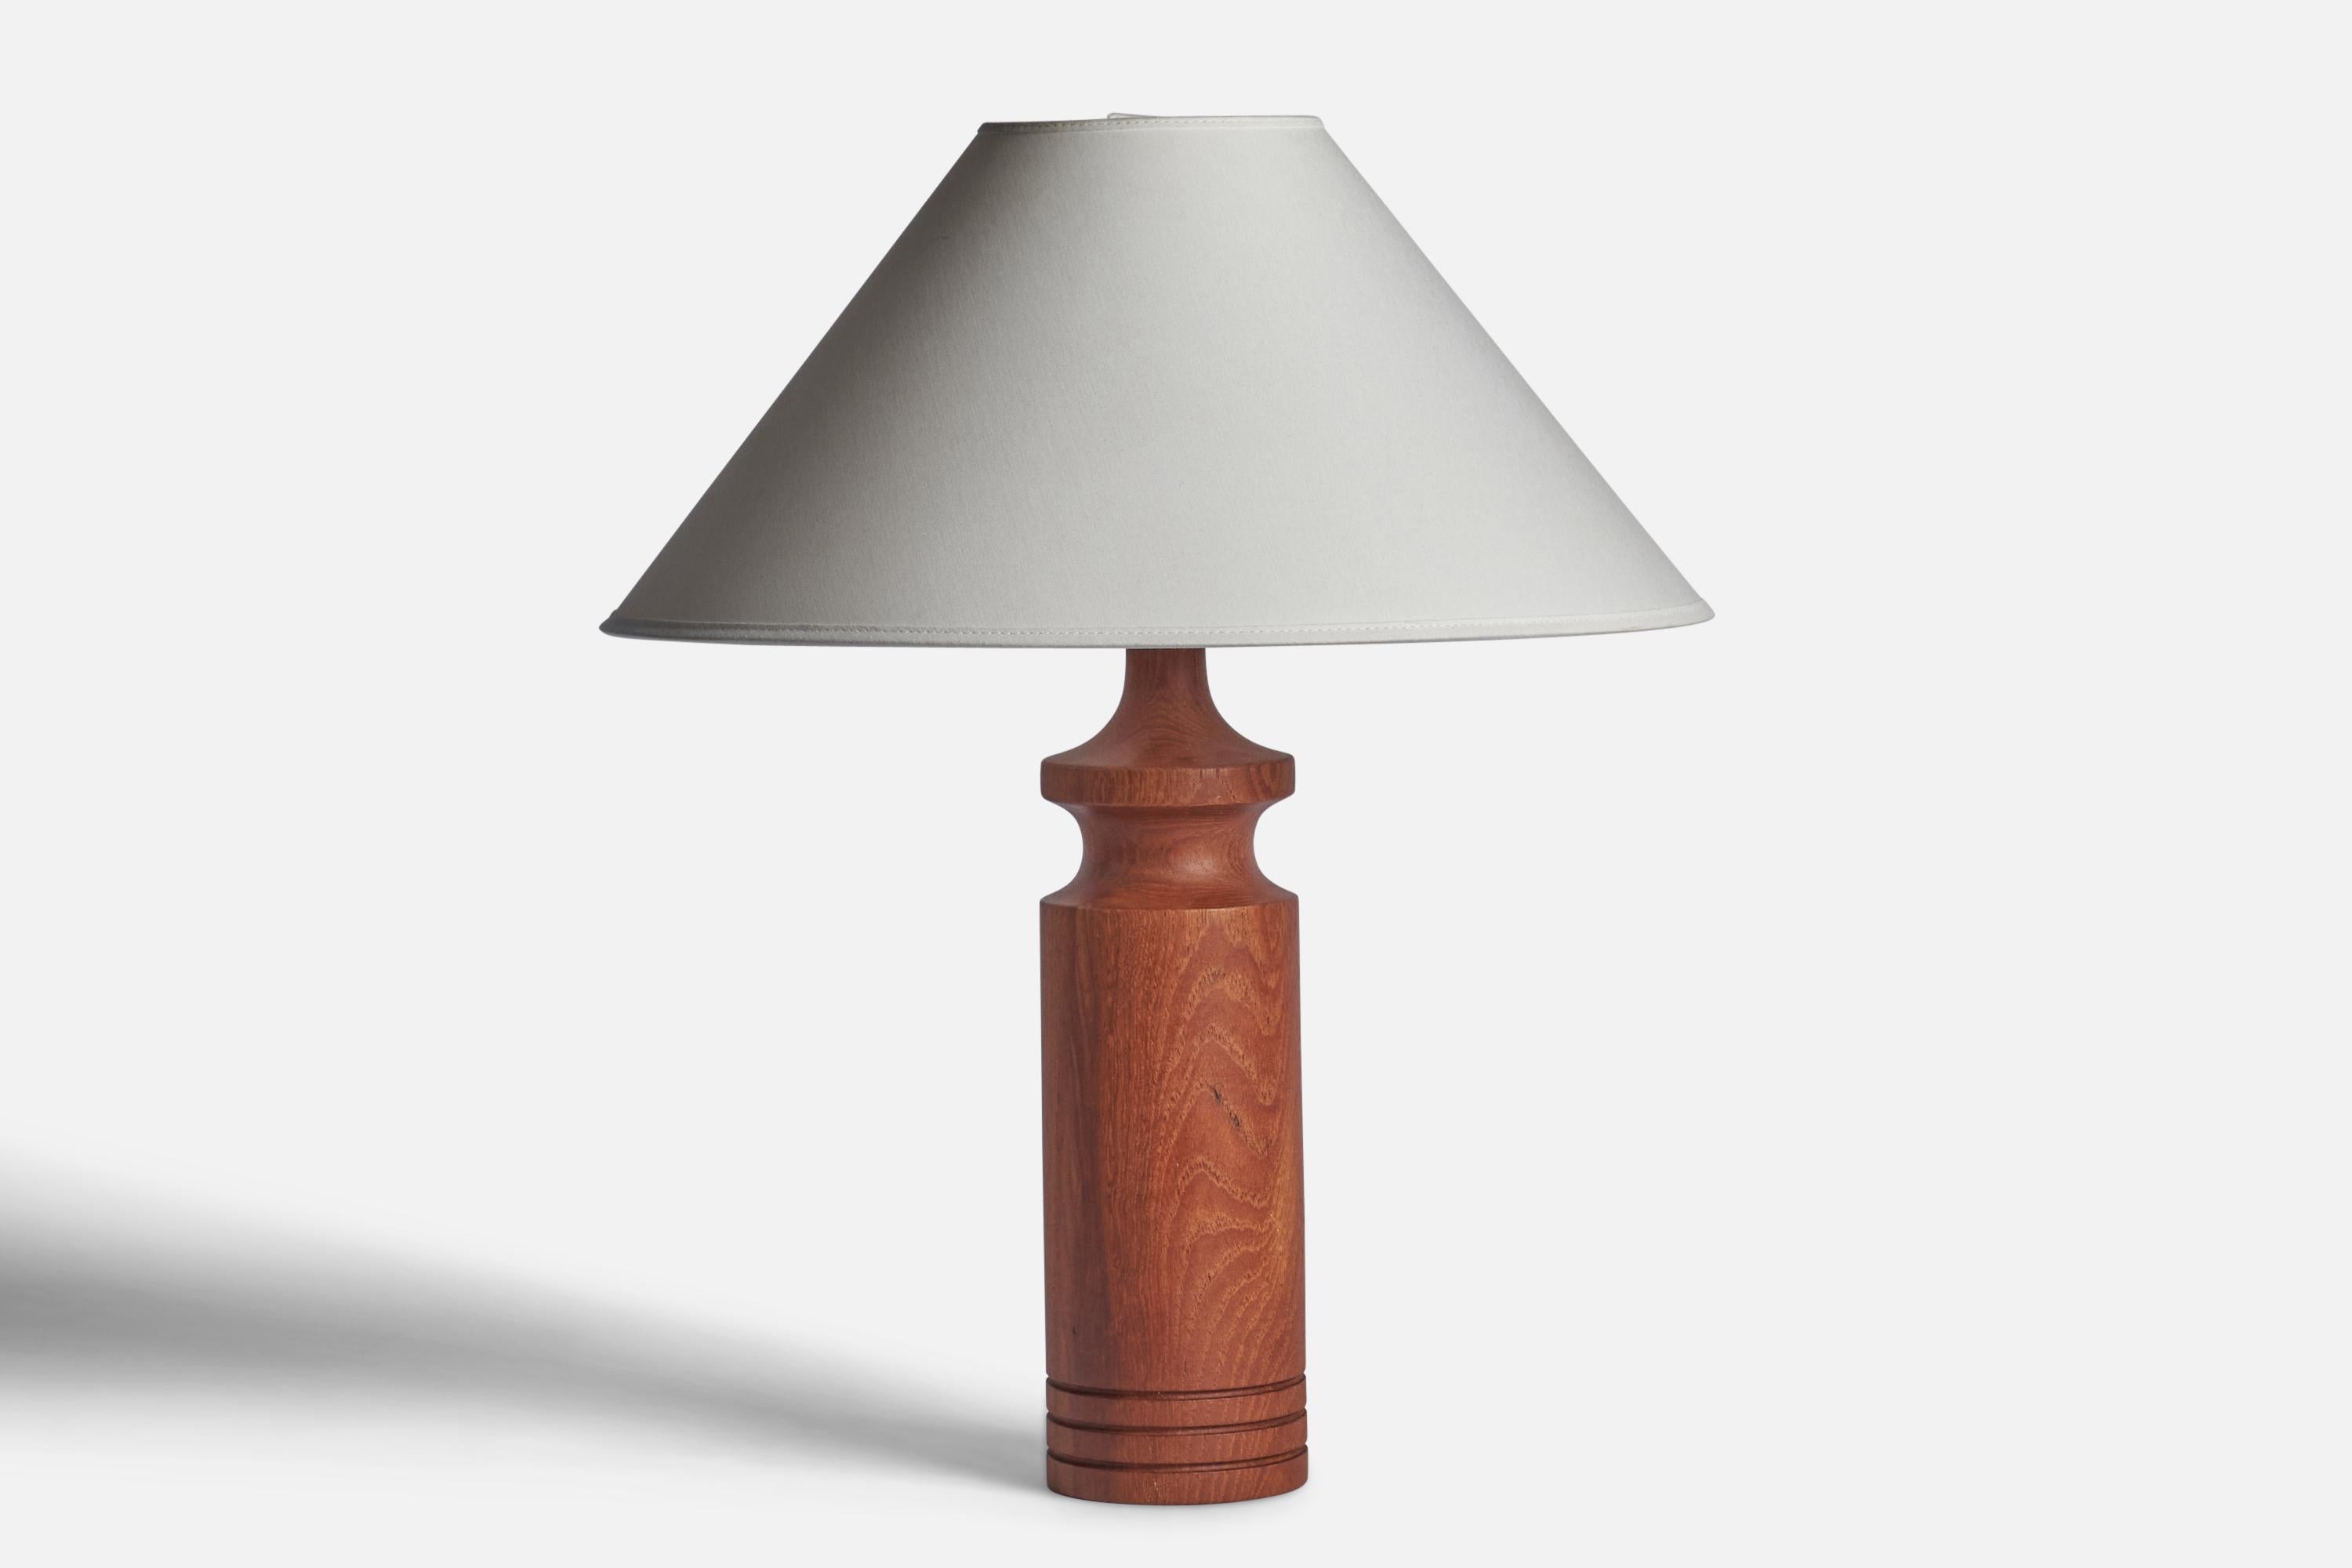 A teak table lamp designed and produced in Sweden, 1950s.

Dimensions of Lamp (inches): 14.75” H x 3.75” Diameter
Dimensions of Shade (inches): 4.5” Top Diameter x 16” Bottom Diameter x 7.25” H
Dimensions of Lamp with Shade (inches): 22.75” H x 16”